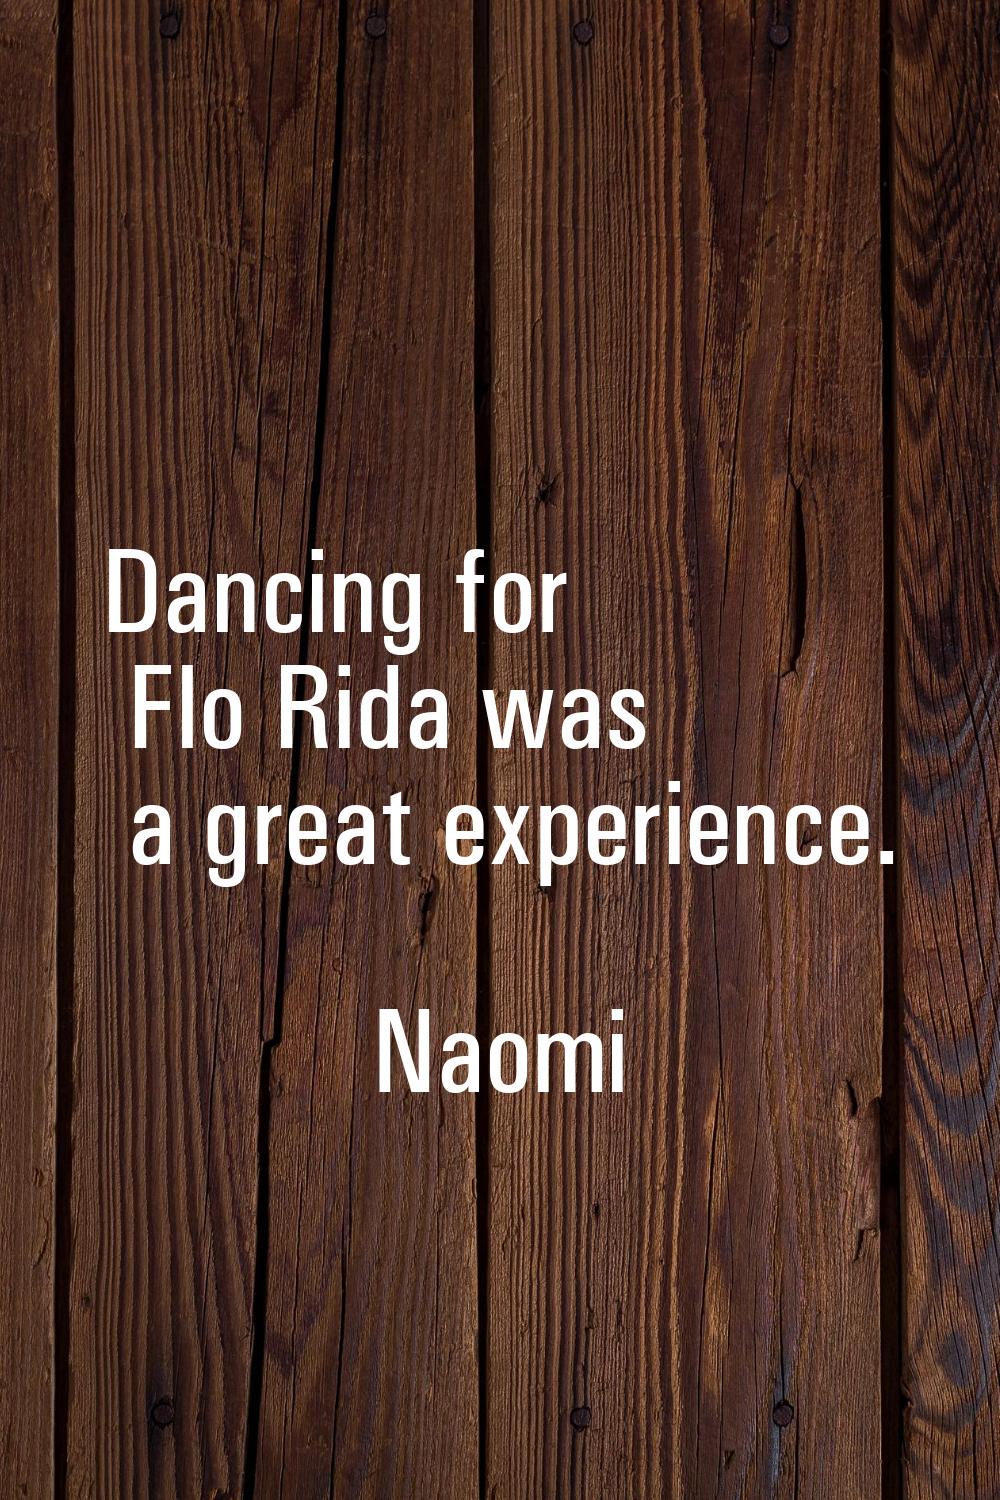 Dancing for Flo Rida was a great experience.